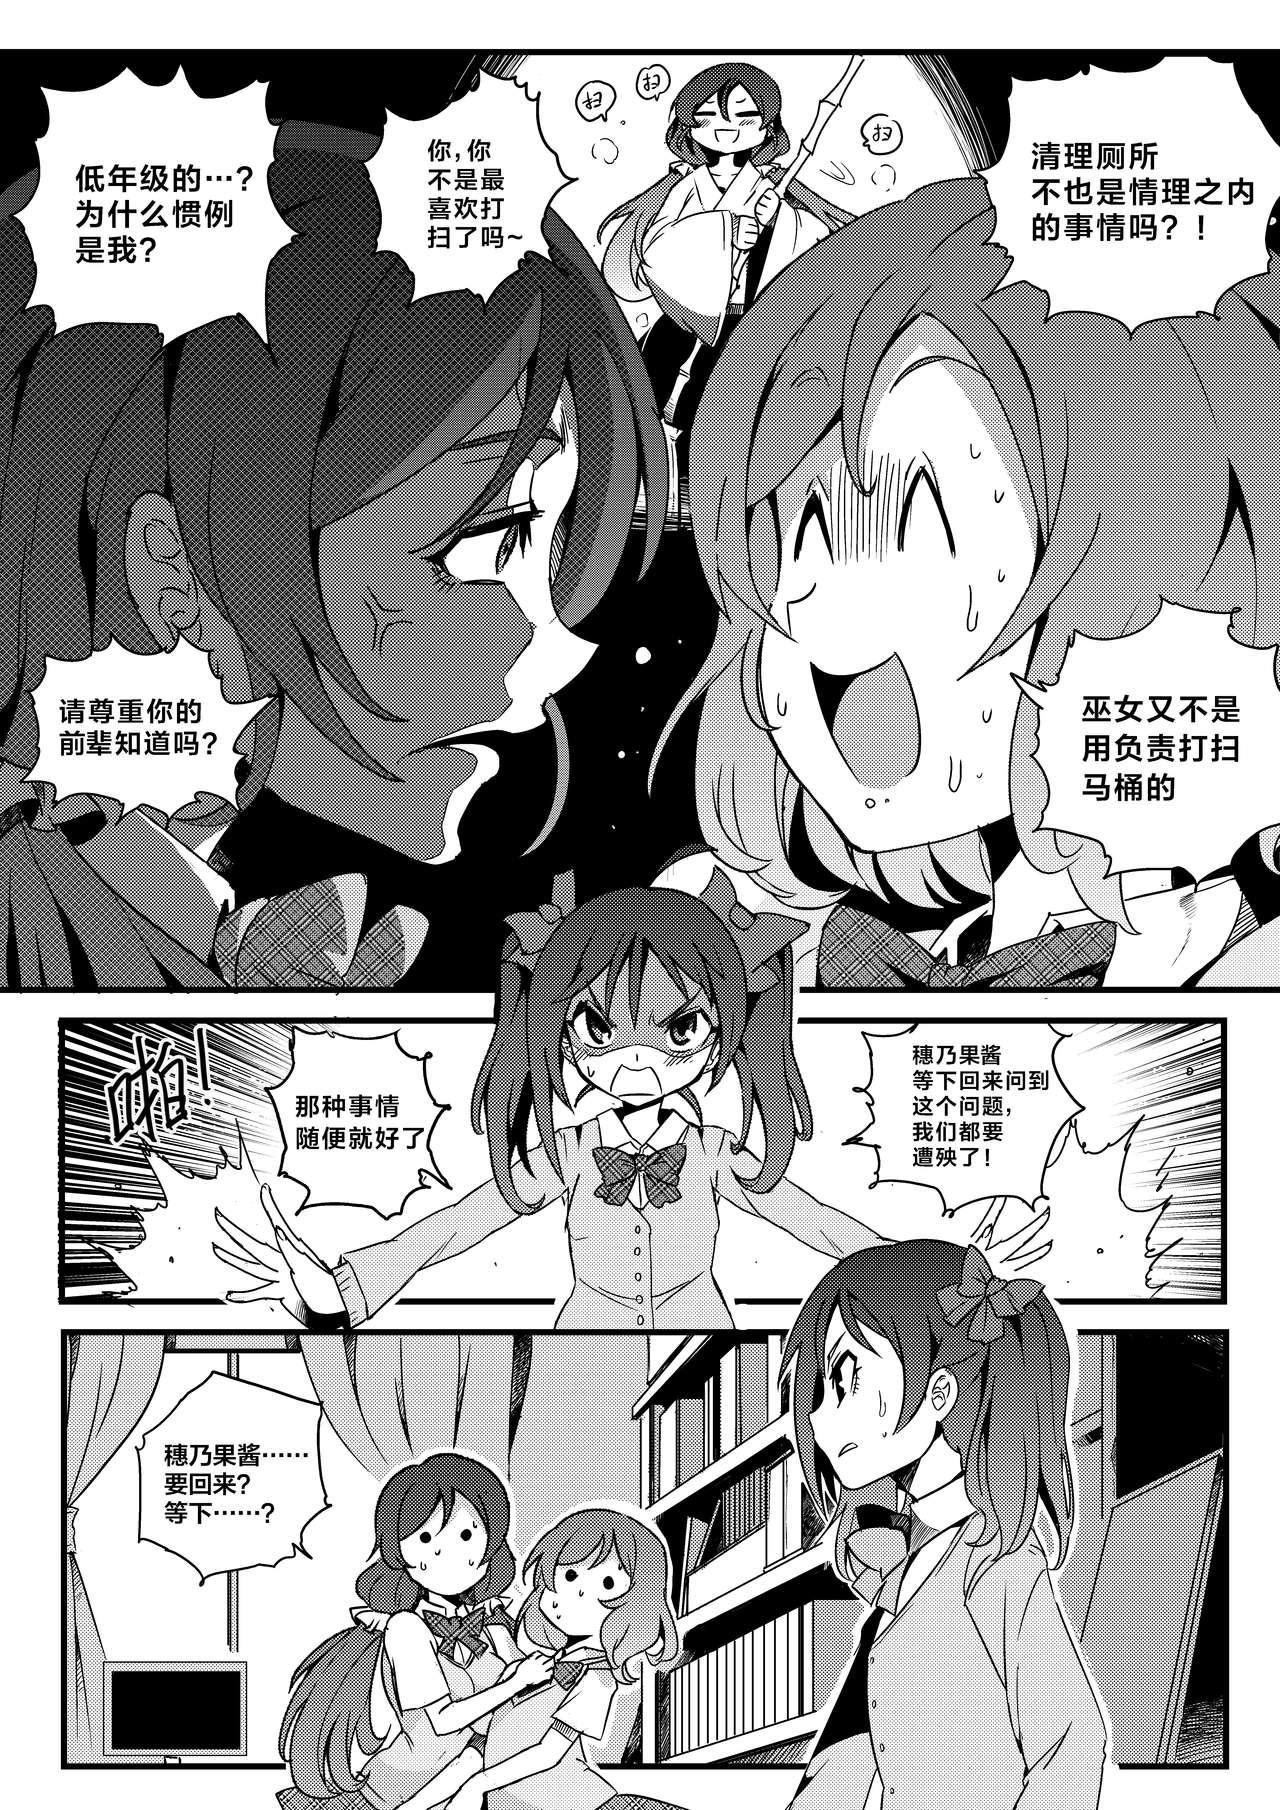 Perra 果胆卯威 - Kantai collection The idolmaster Love live Titten - Page 4